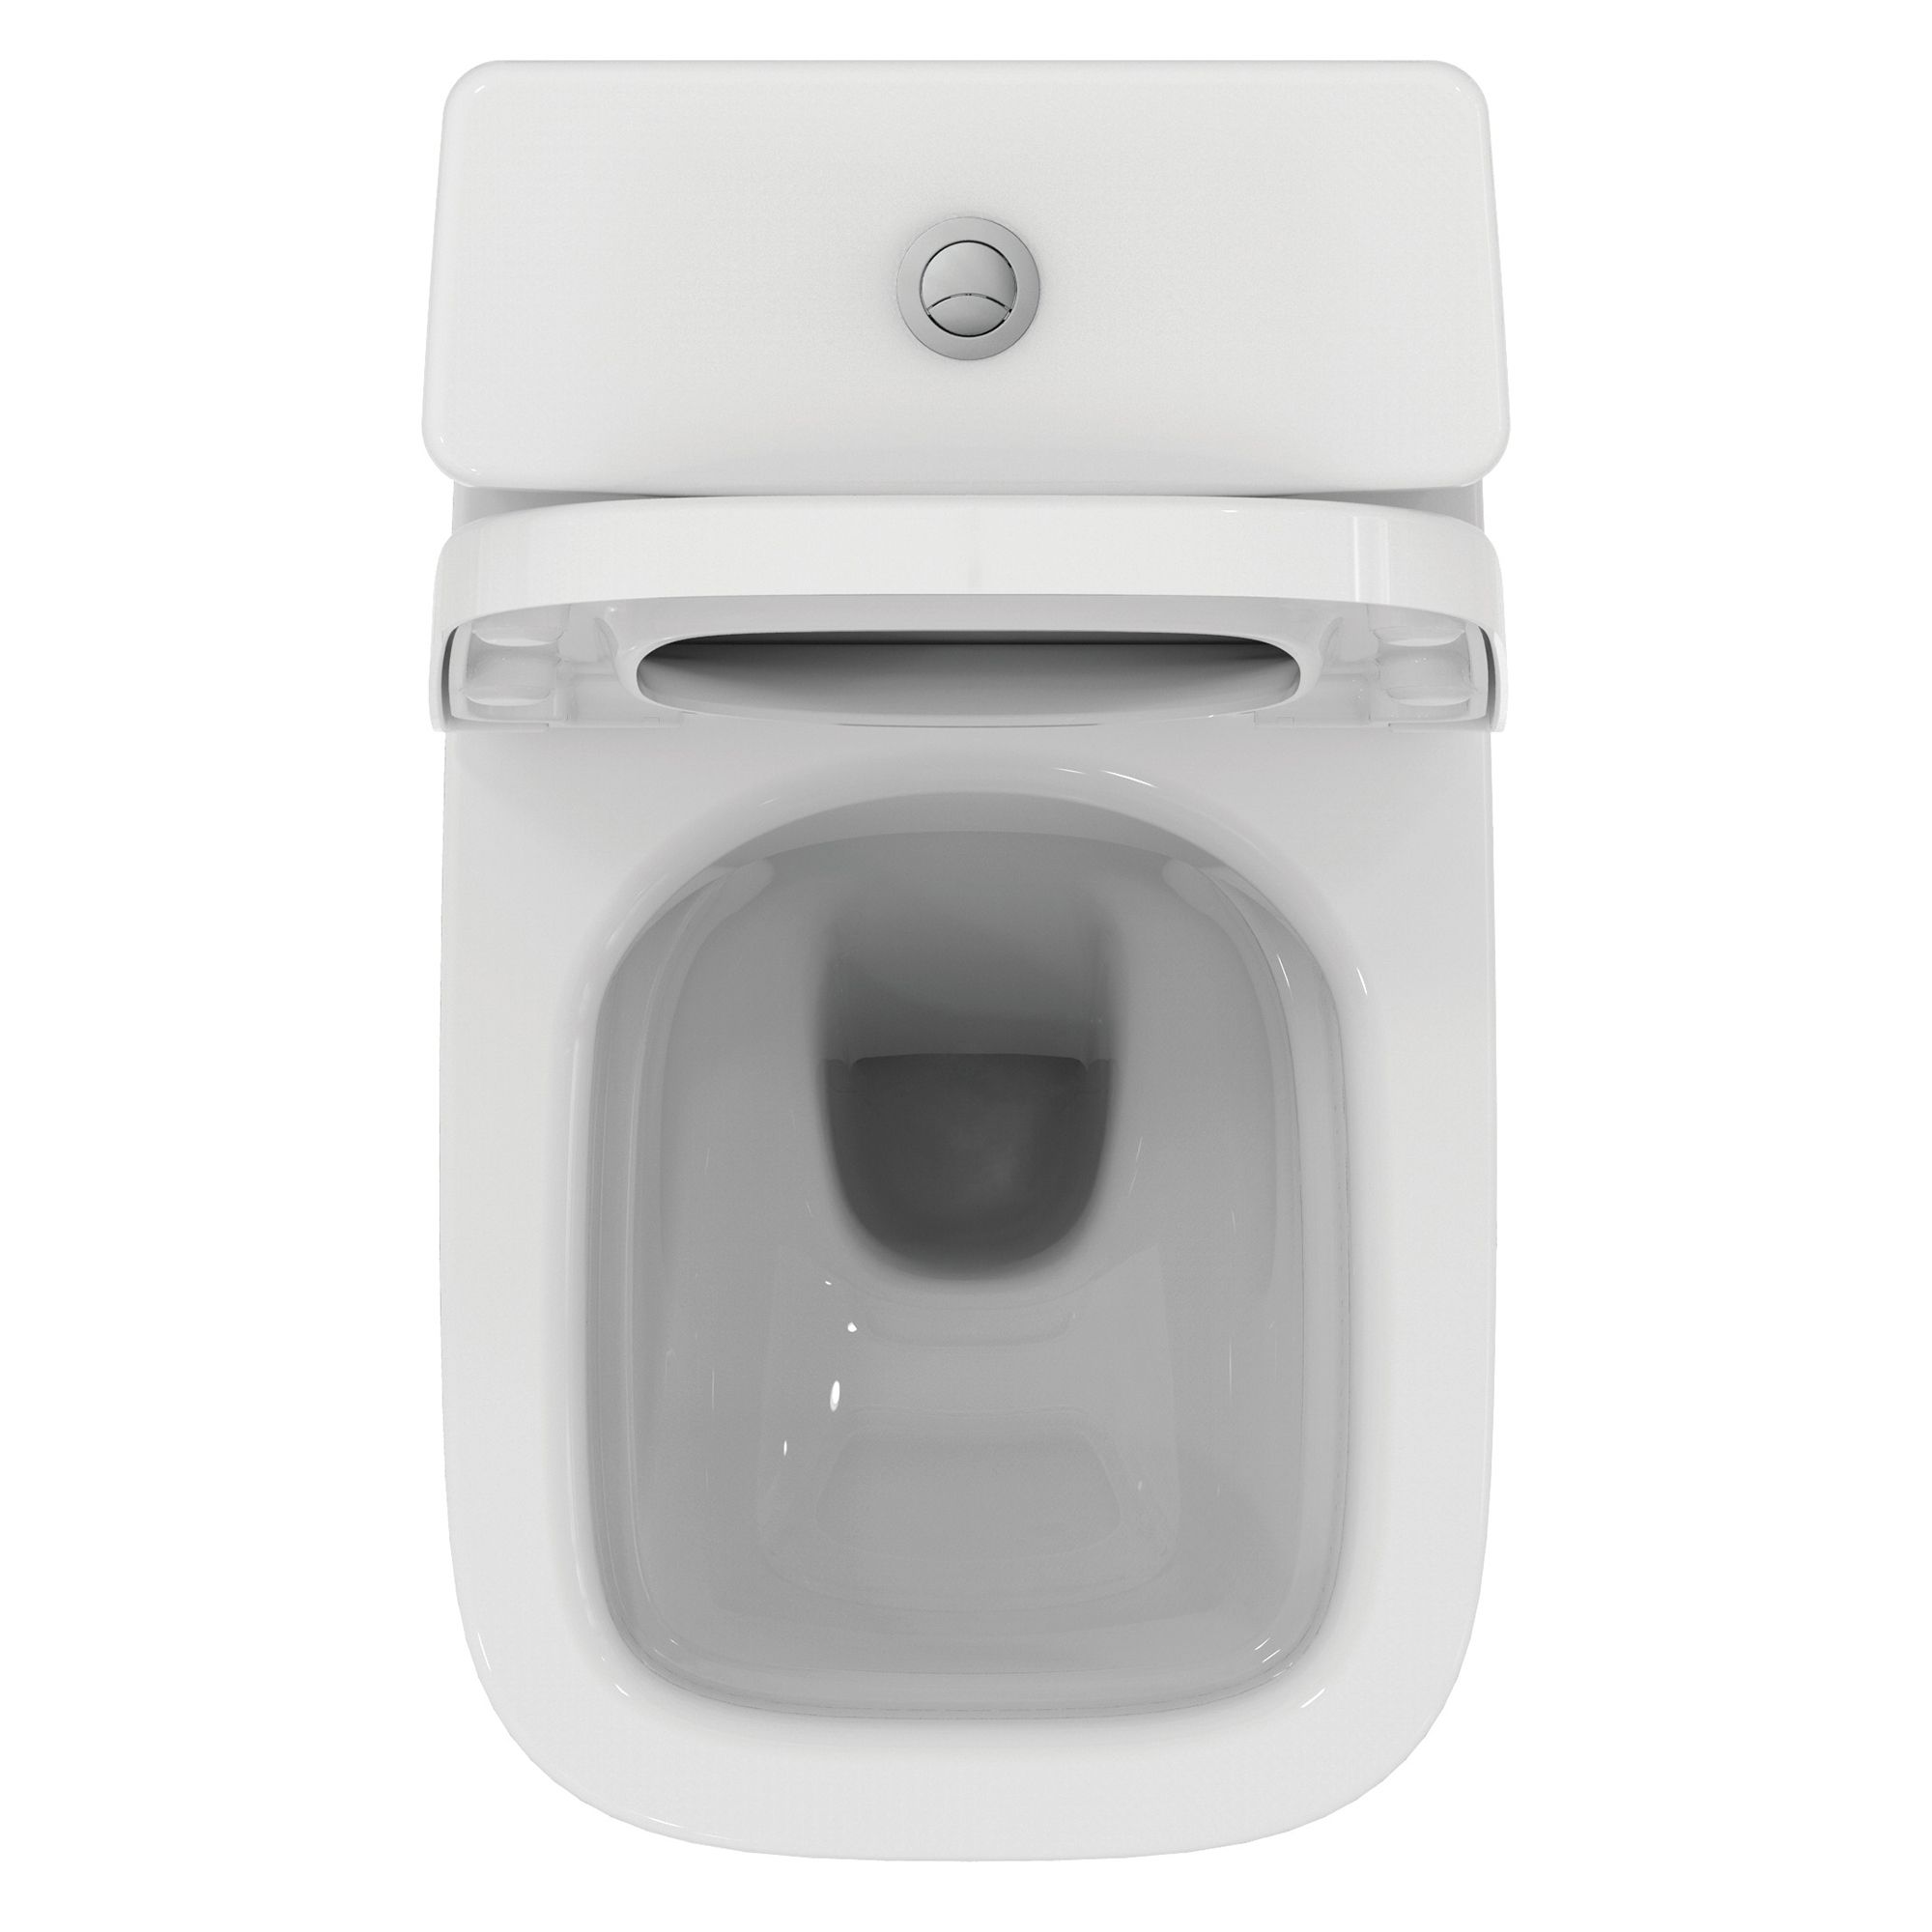 Ideal Standard i.life A White Standard Back to wall close-coupled Square Toilet set with Soft close seat